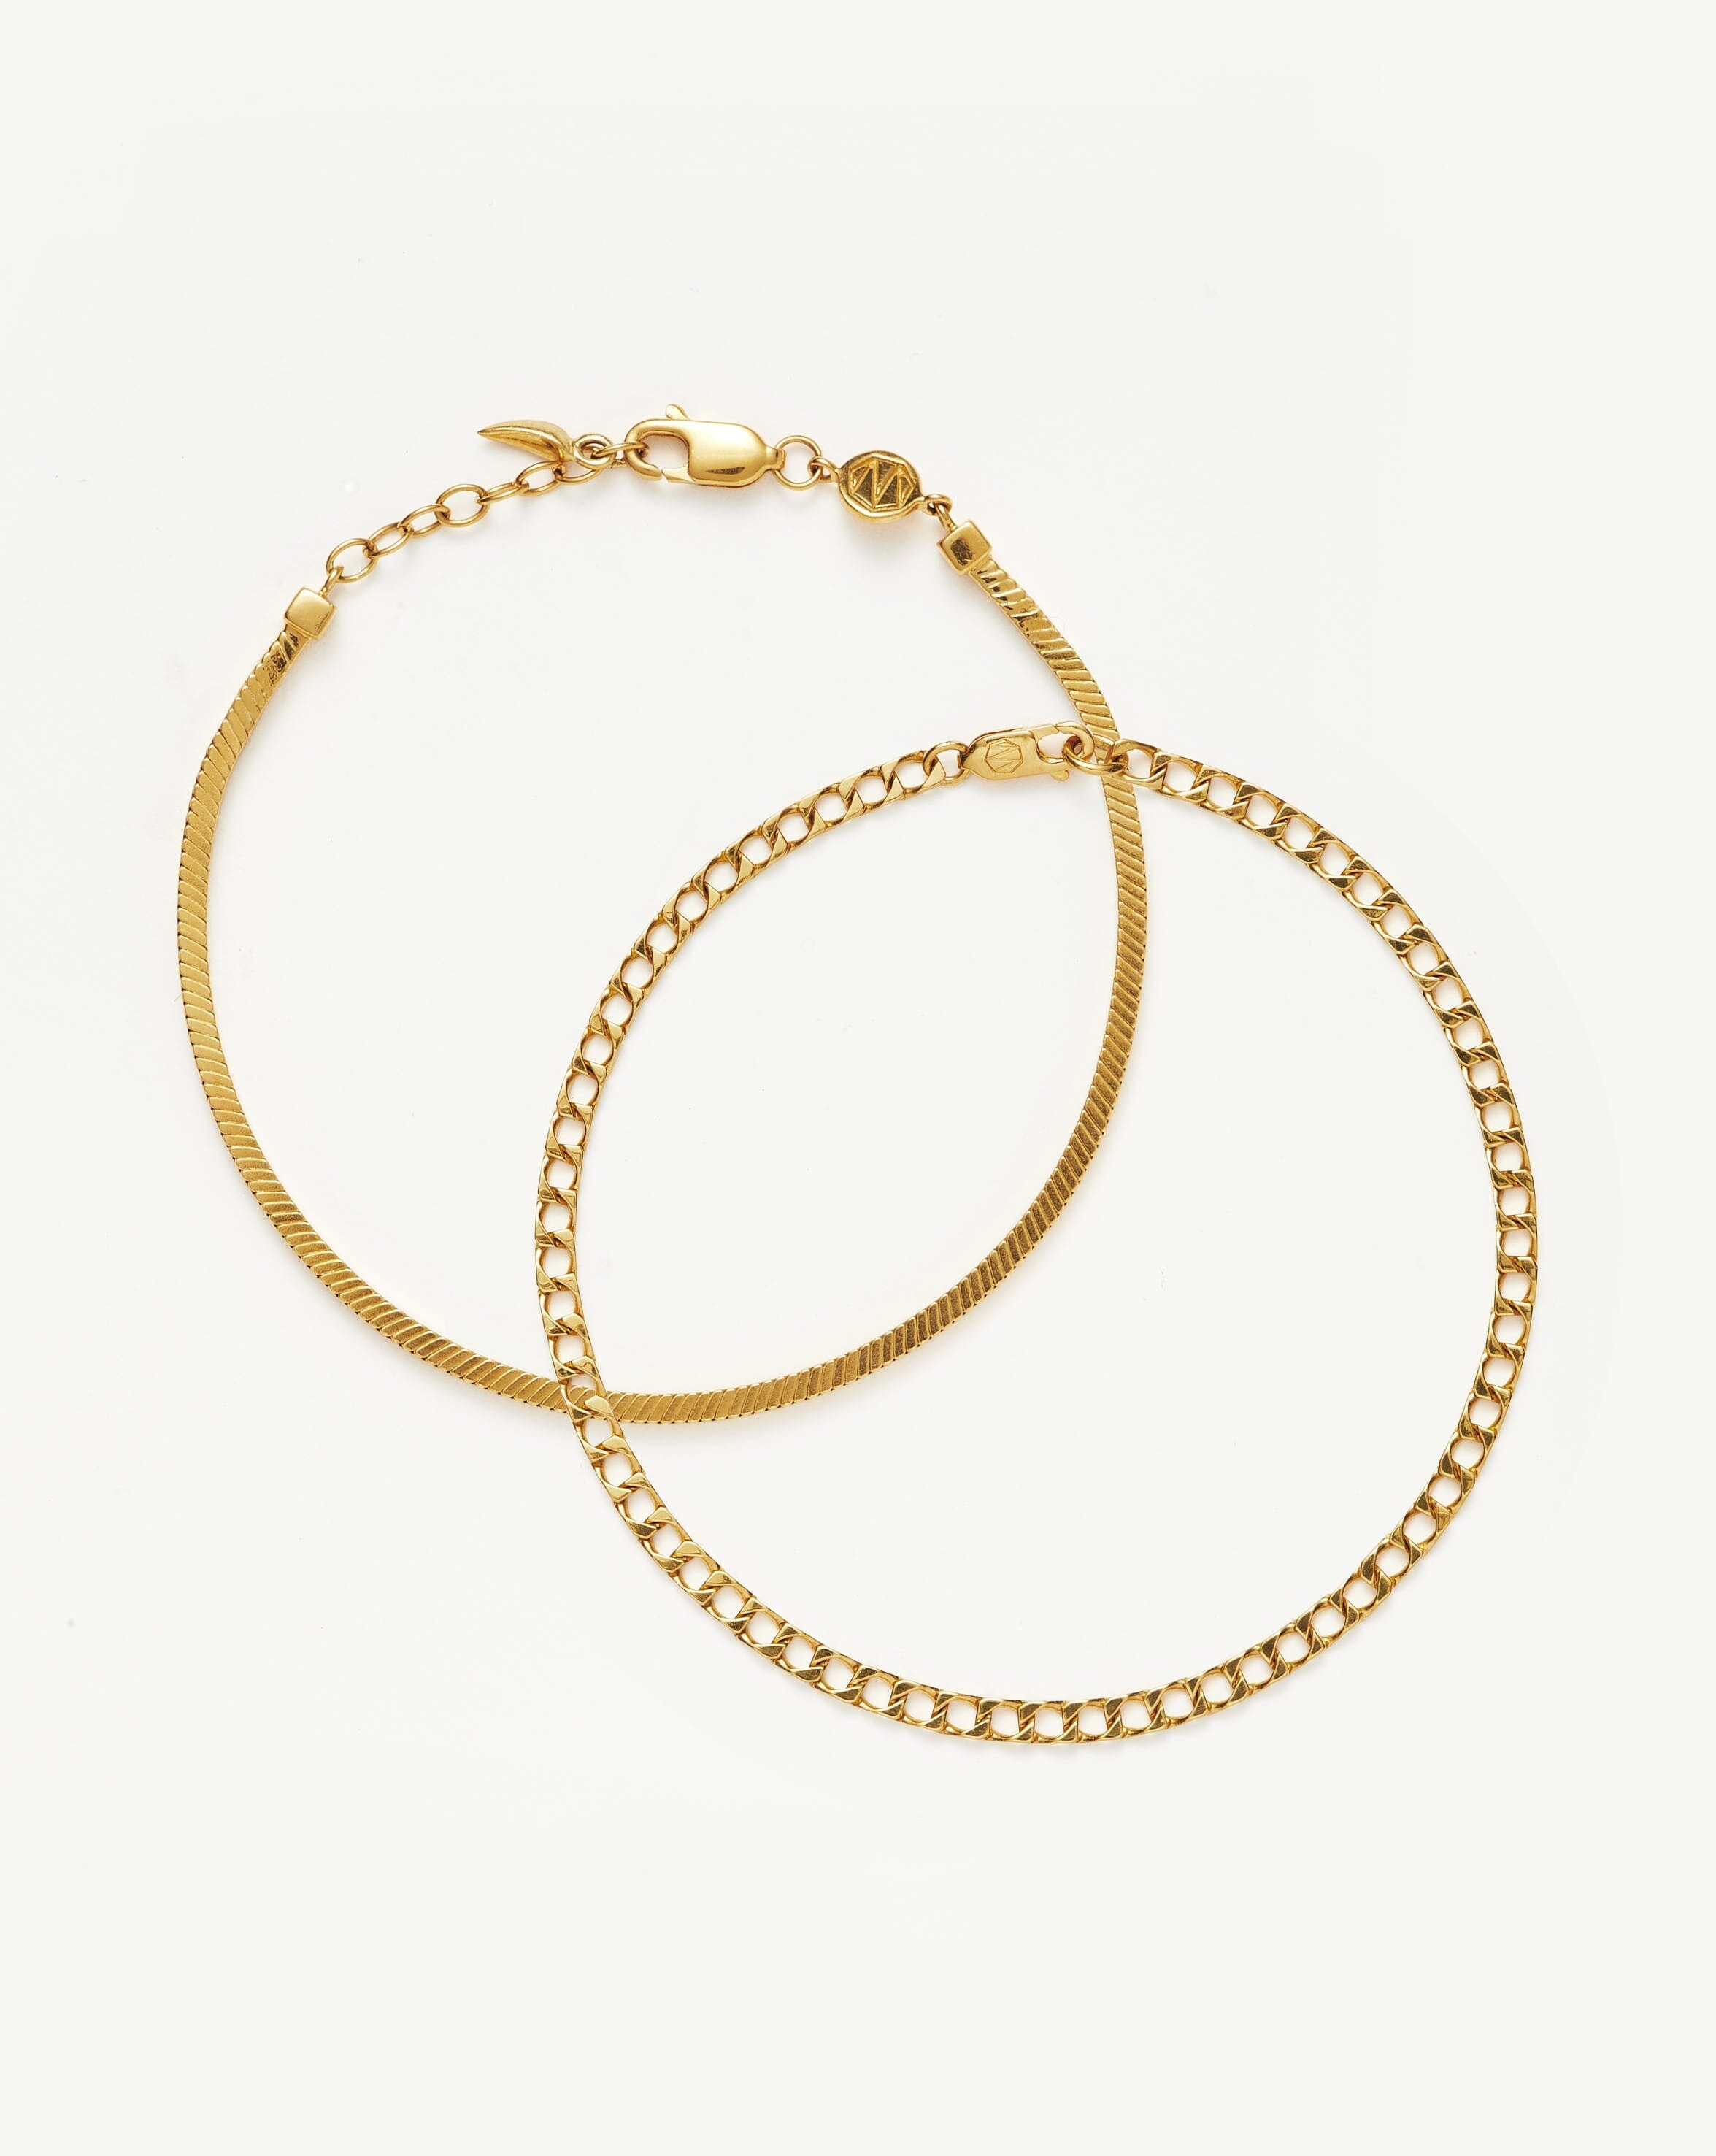 Iconic Lucy Williams Chain Bracelet Set | 18ct Gold Plated Vermeil Layering Sets Missoma 18ct Gold Plated Vermeil 